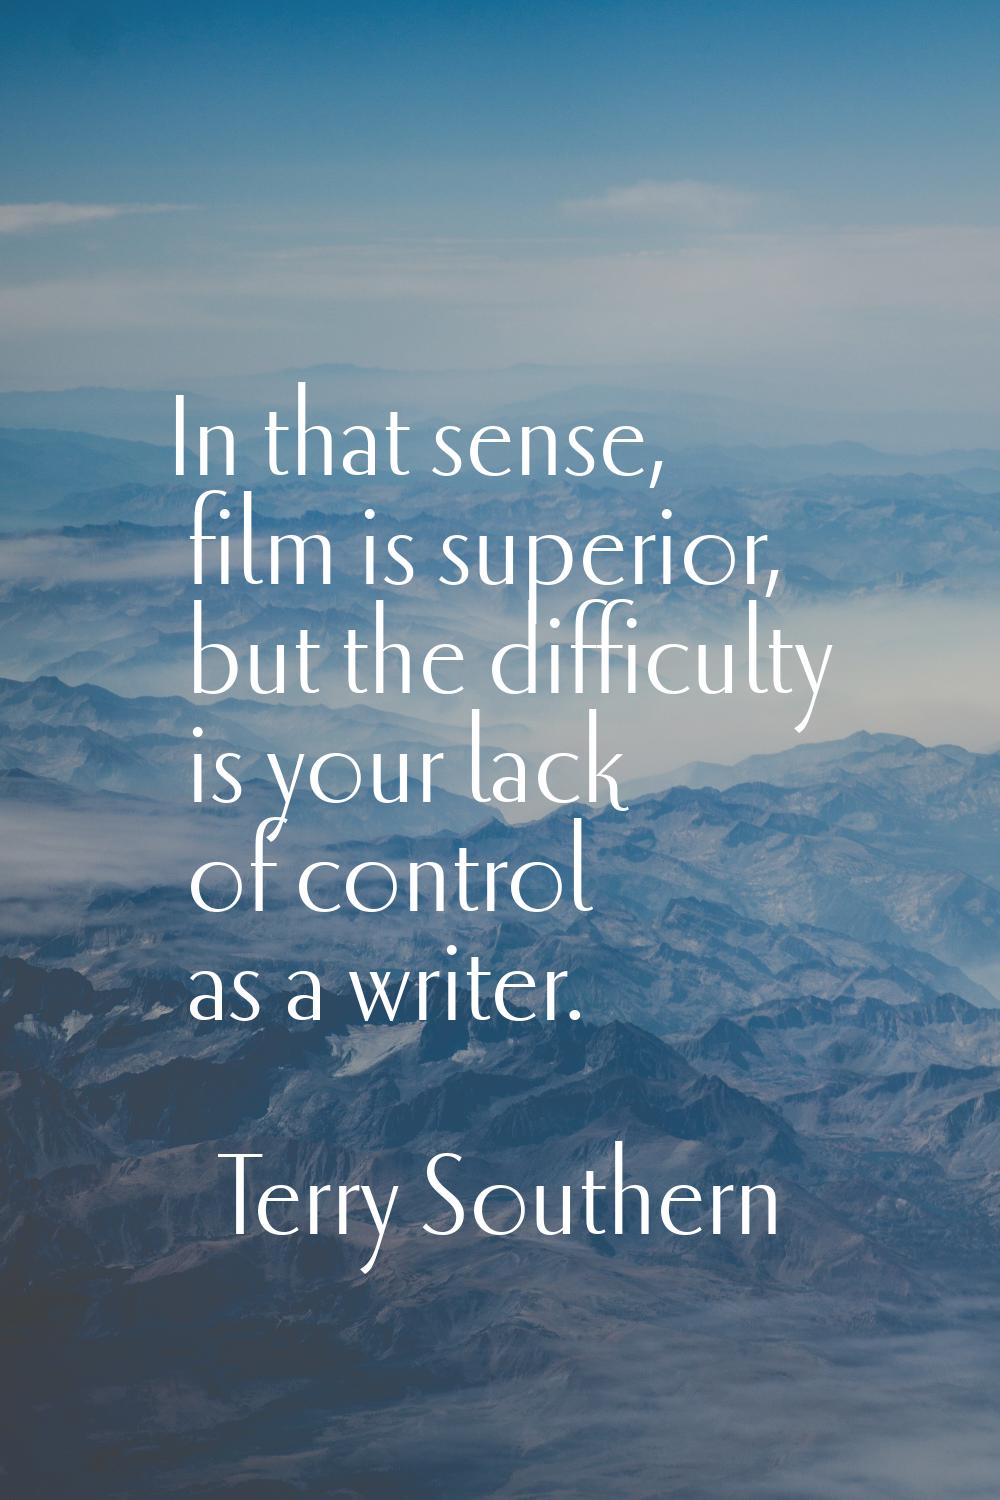 In that sense, film is superior, but the difficulty is your lack of control as a writer.